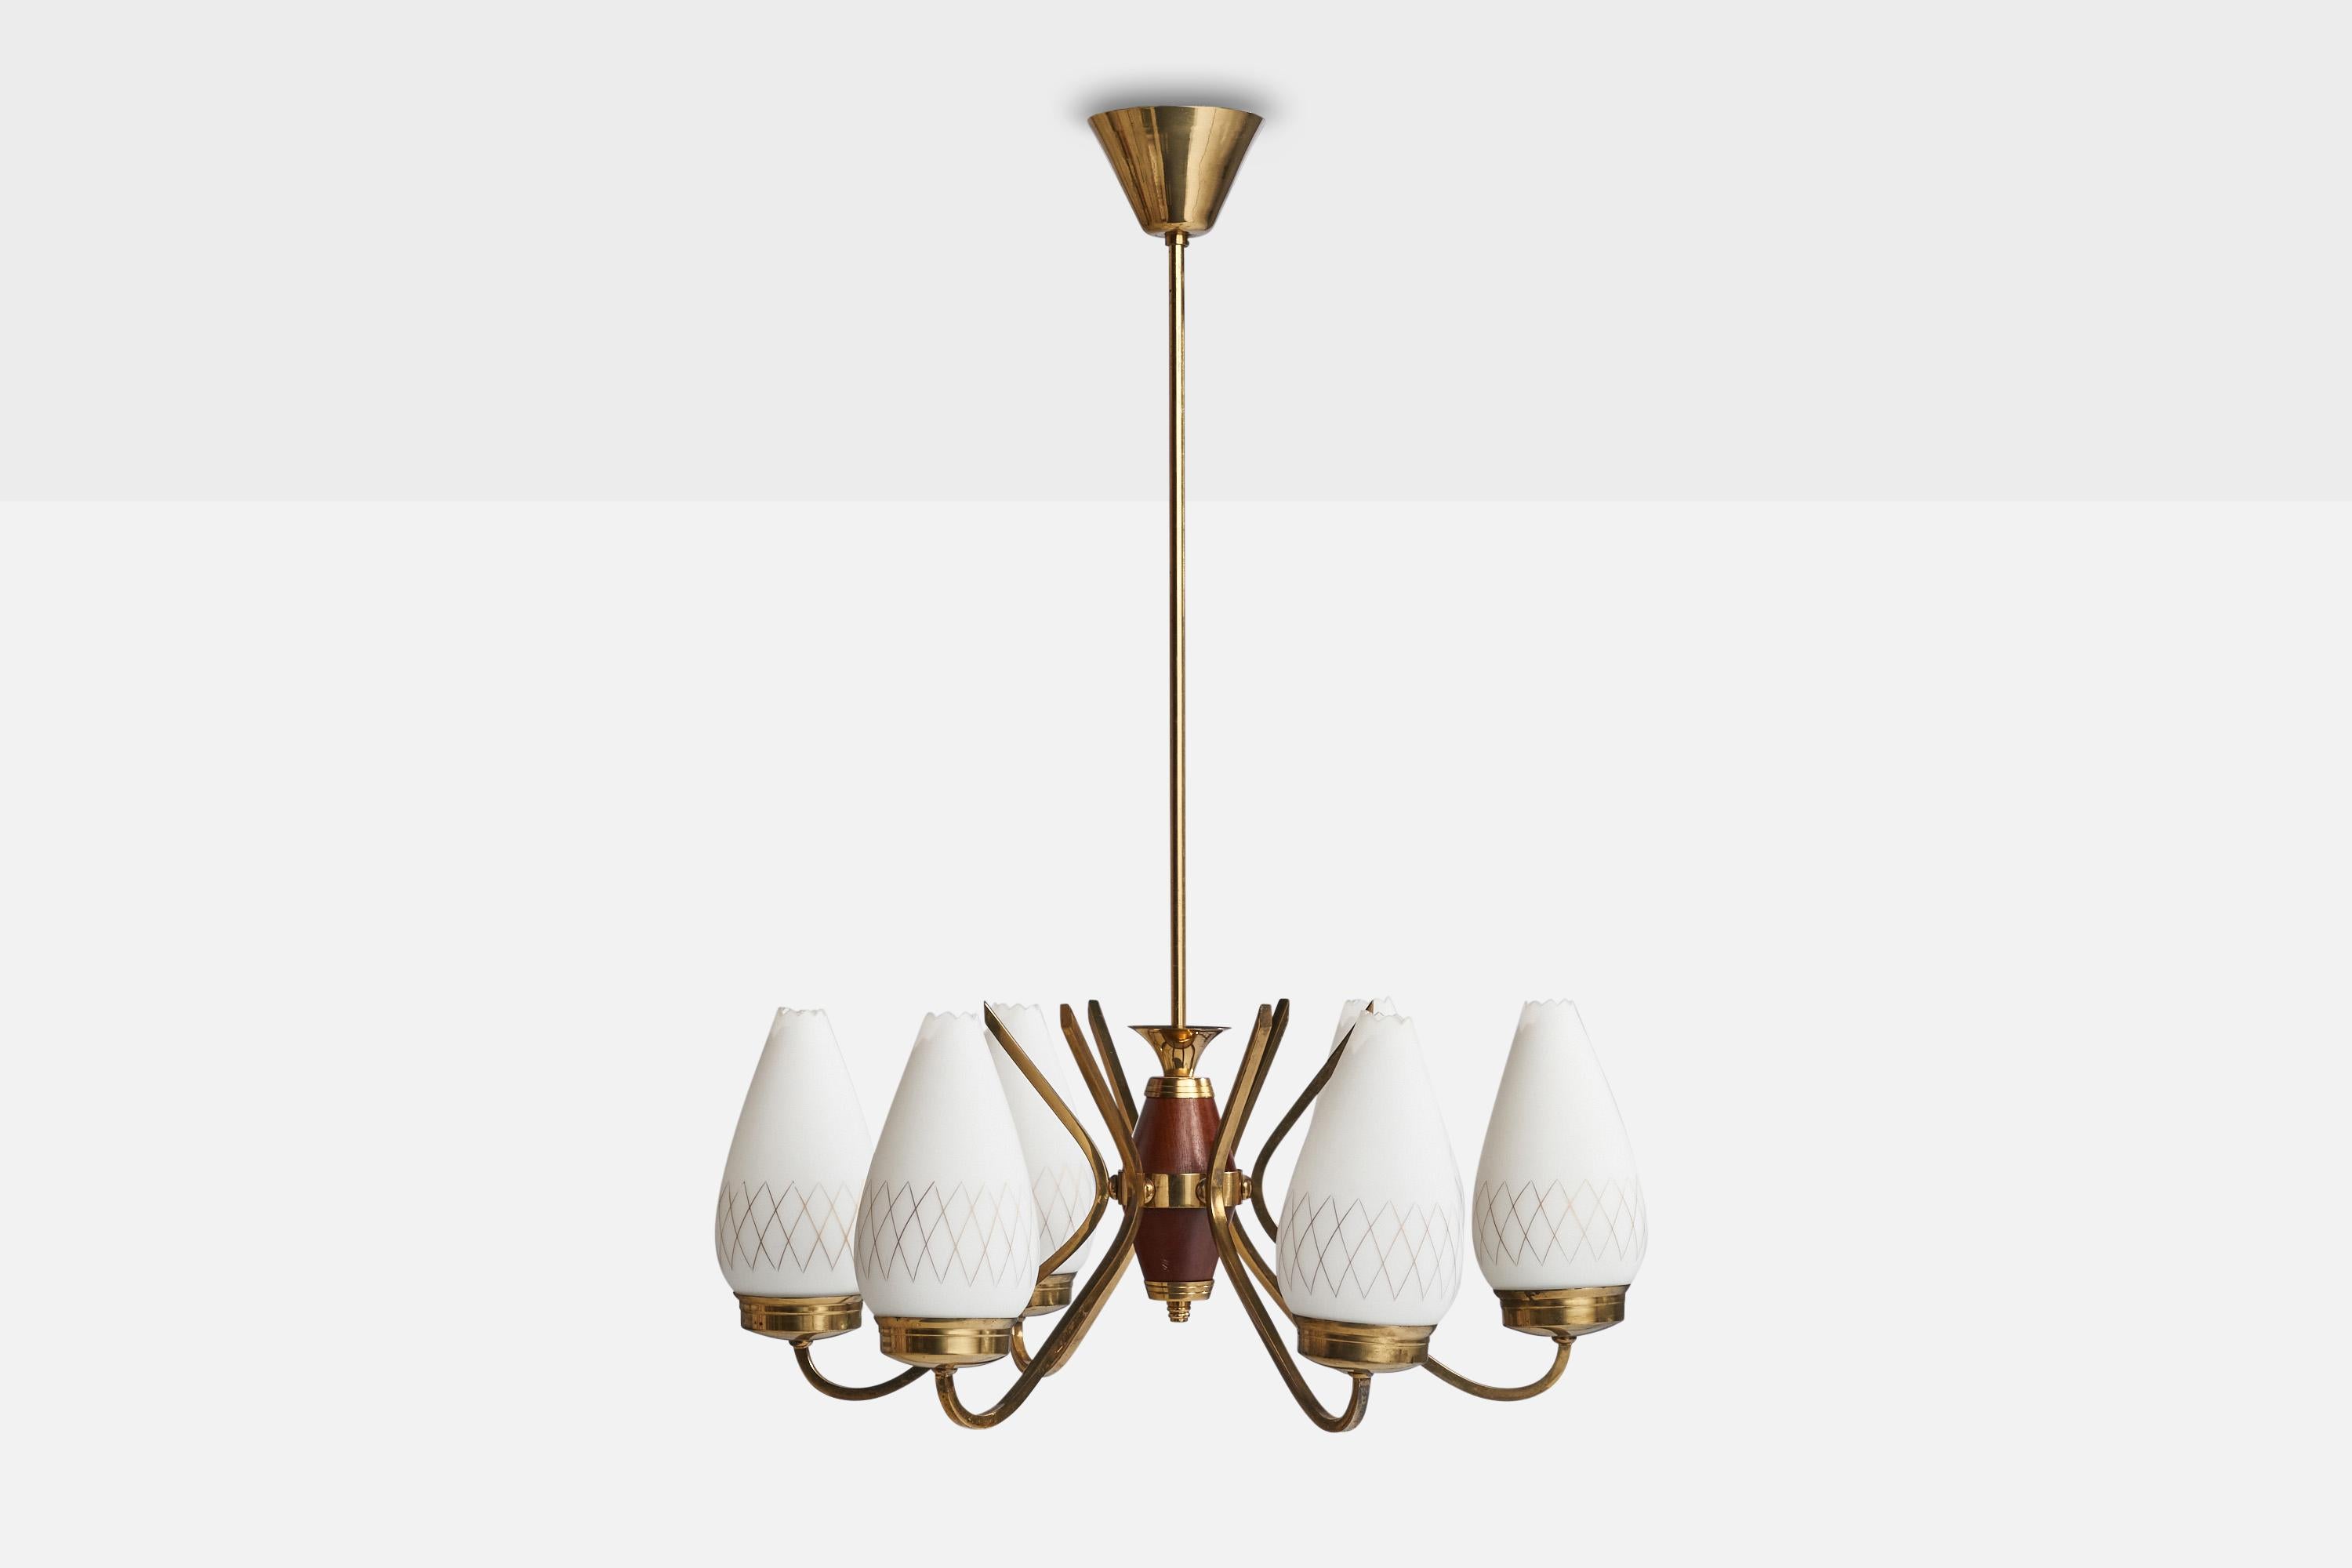 A brass, teak and opaline glass chandelier designed and produced in Sweden, 1950s.

Dimensions of canopy (inches): 3” H x 4.25” Diameter
Socket takes standard E-26 bulbs. 6 sockets.There is no maximum wattage stated on the fixture. All lighting will